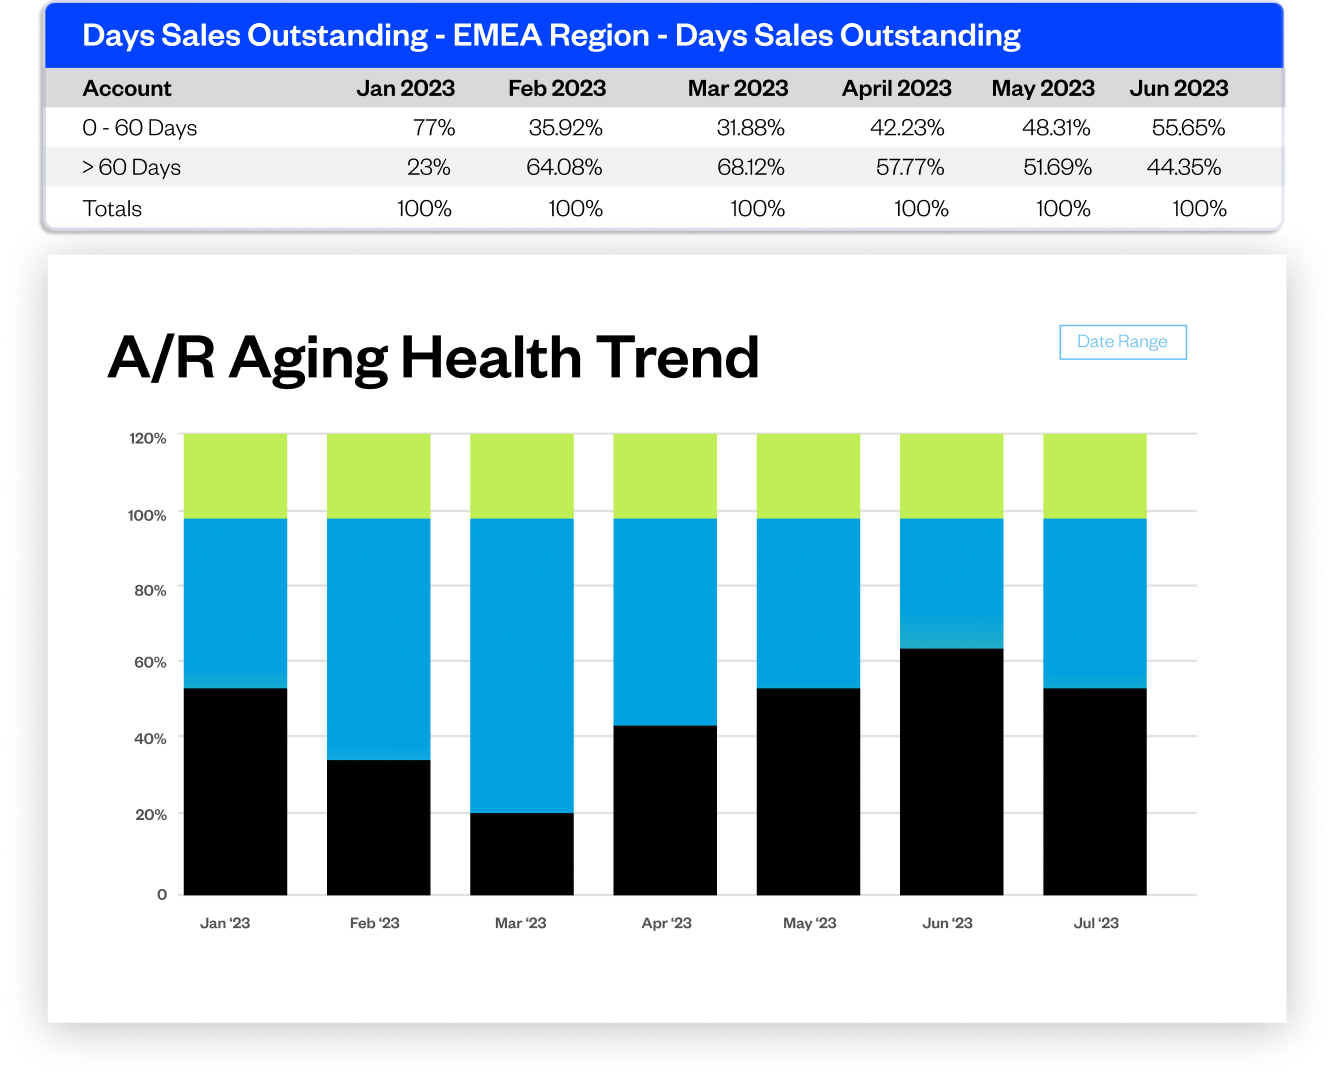 A representation of one of Maxio's custom dashboards, featuring an A/R Aging Health Trend report and Days Sales Outstanding for the EMEA region